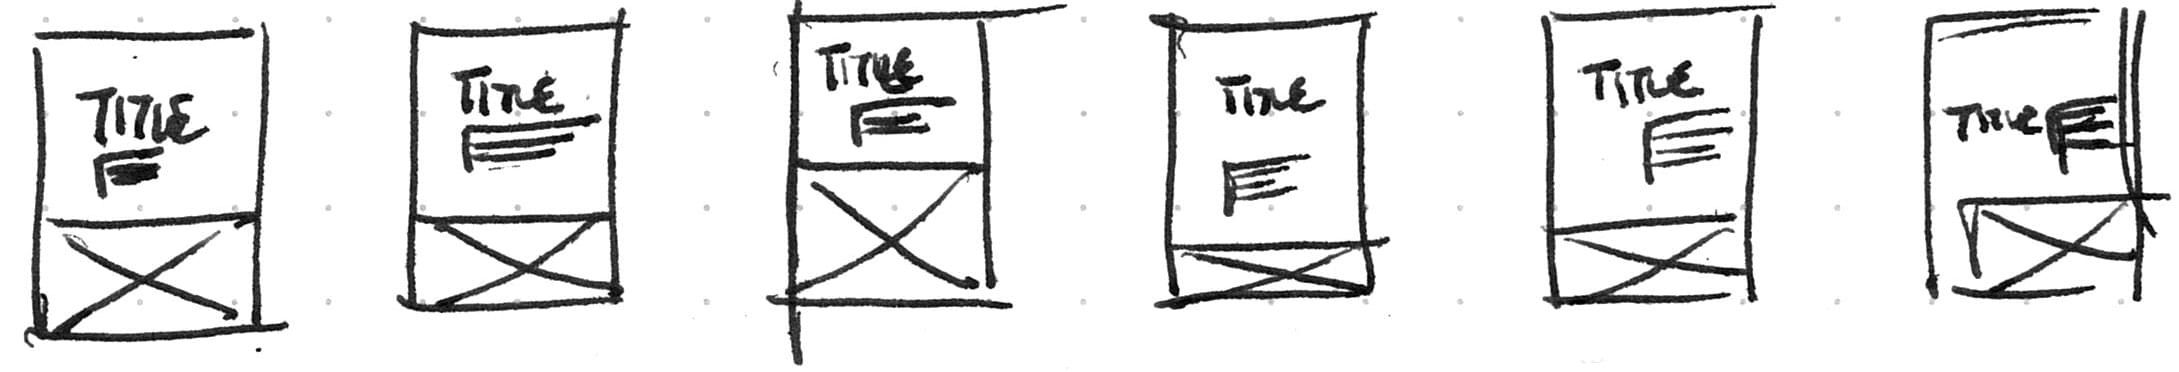 A series of sketches of a page with small variations in the positioning of elements on the page